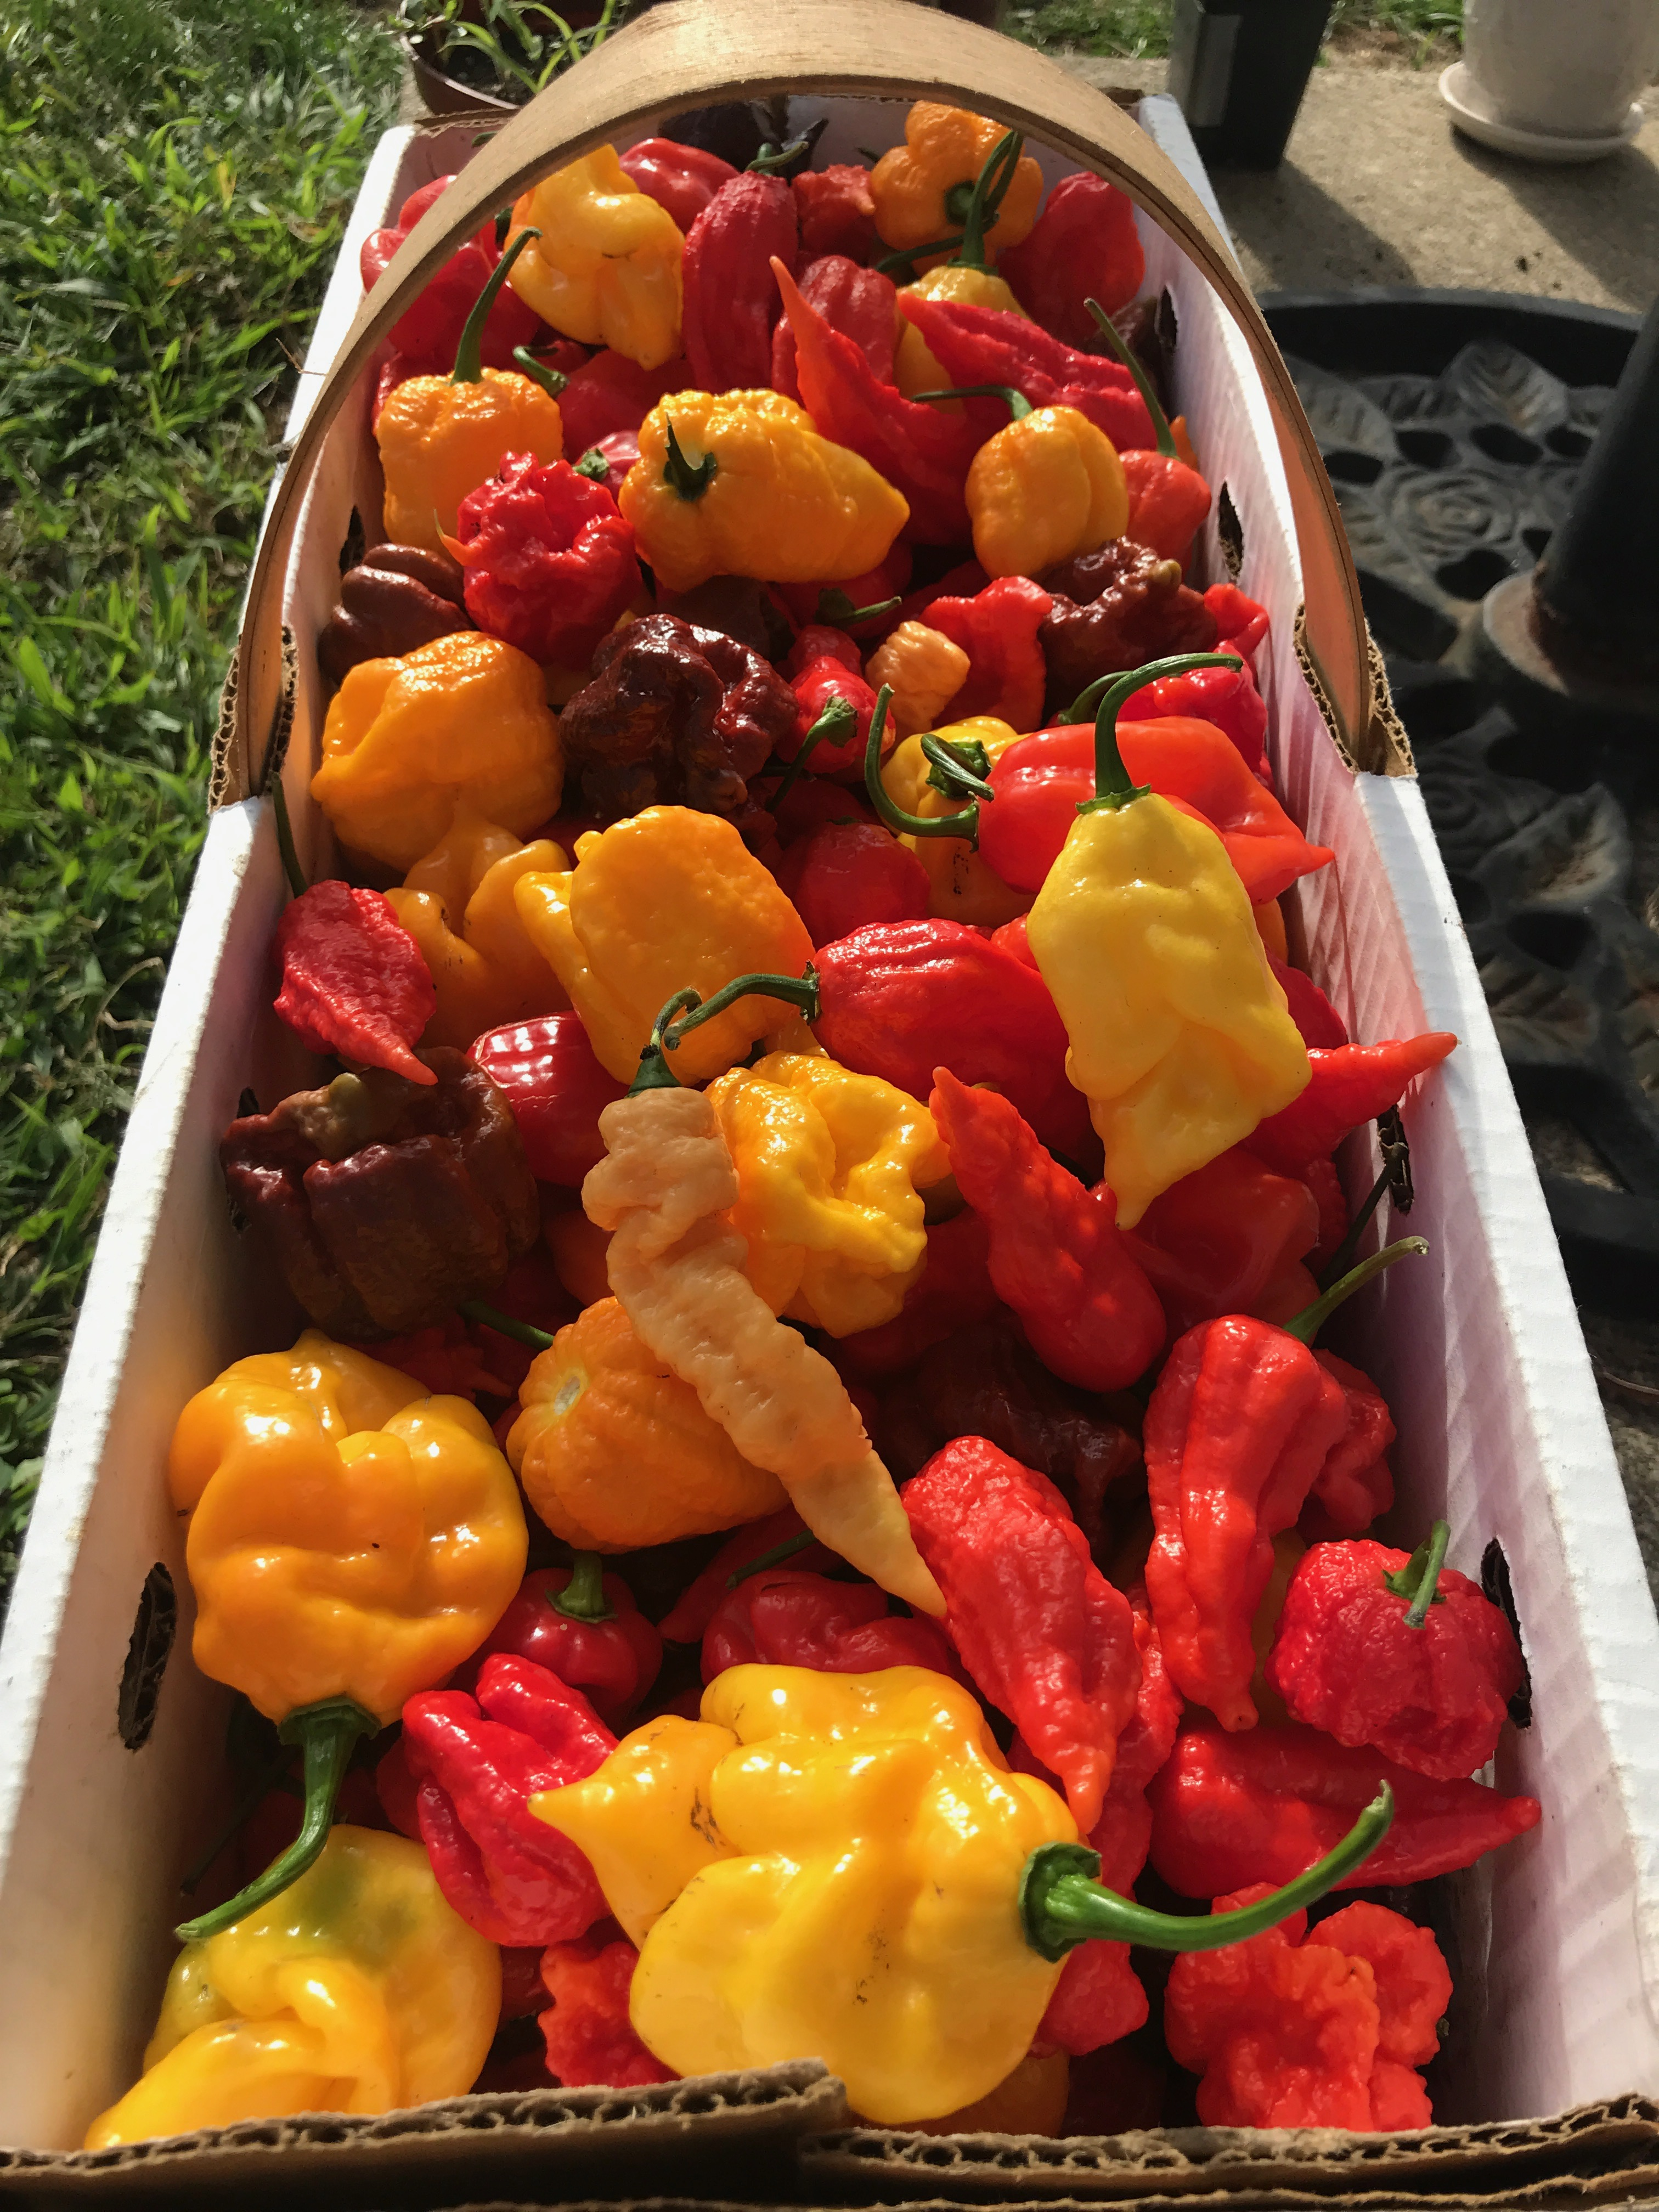 Basket of hot peppers